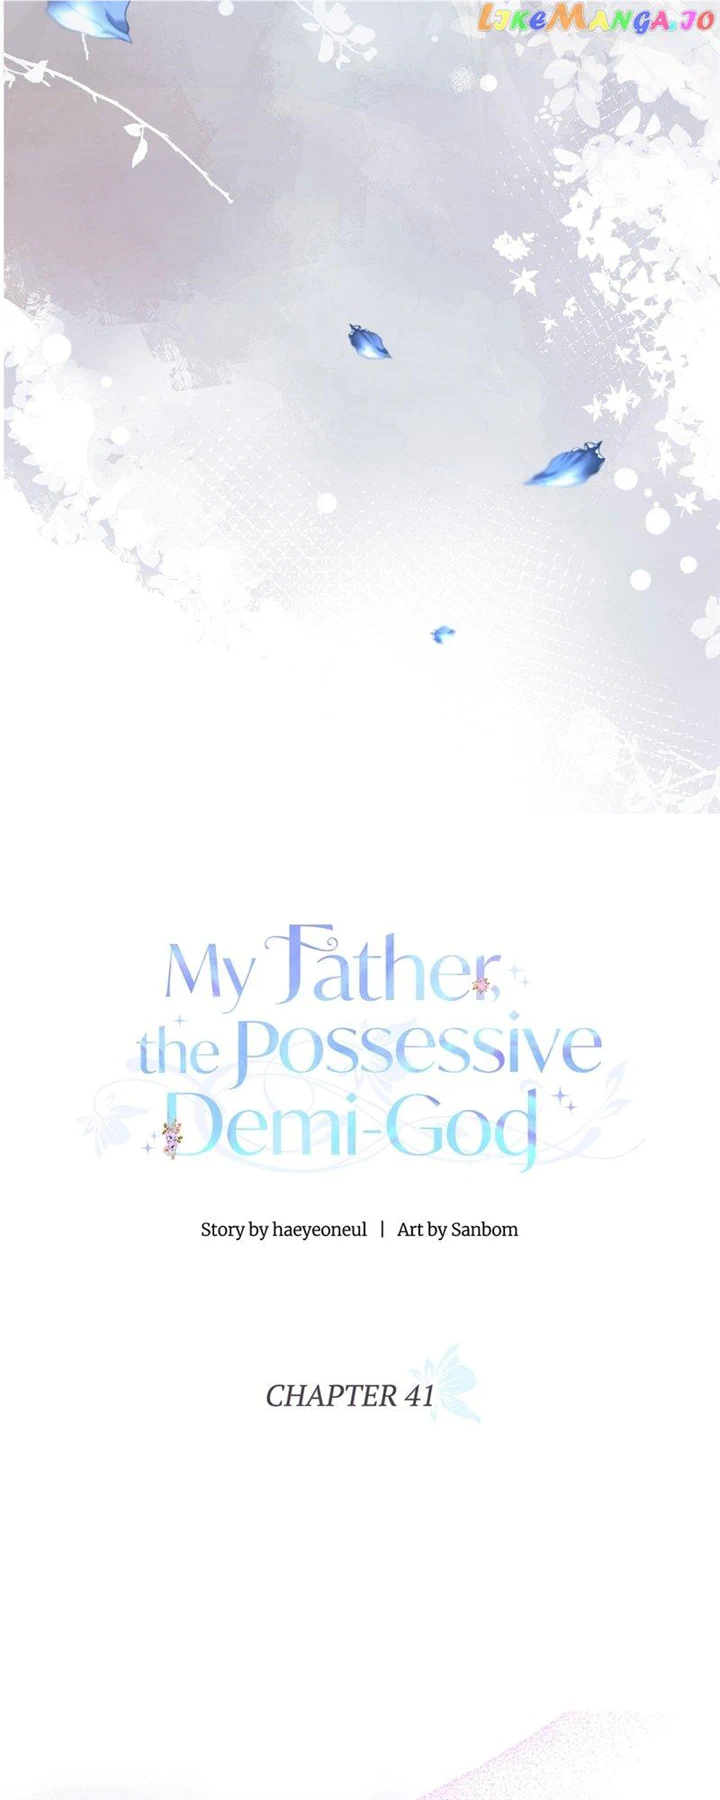 My Father, the Possessive Demi-God chapter 41